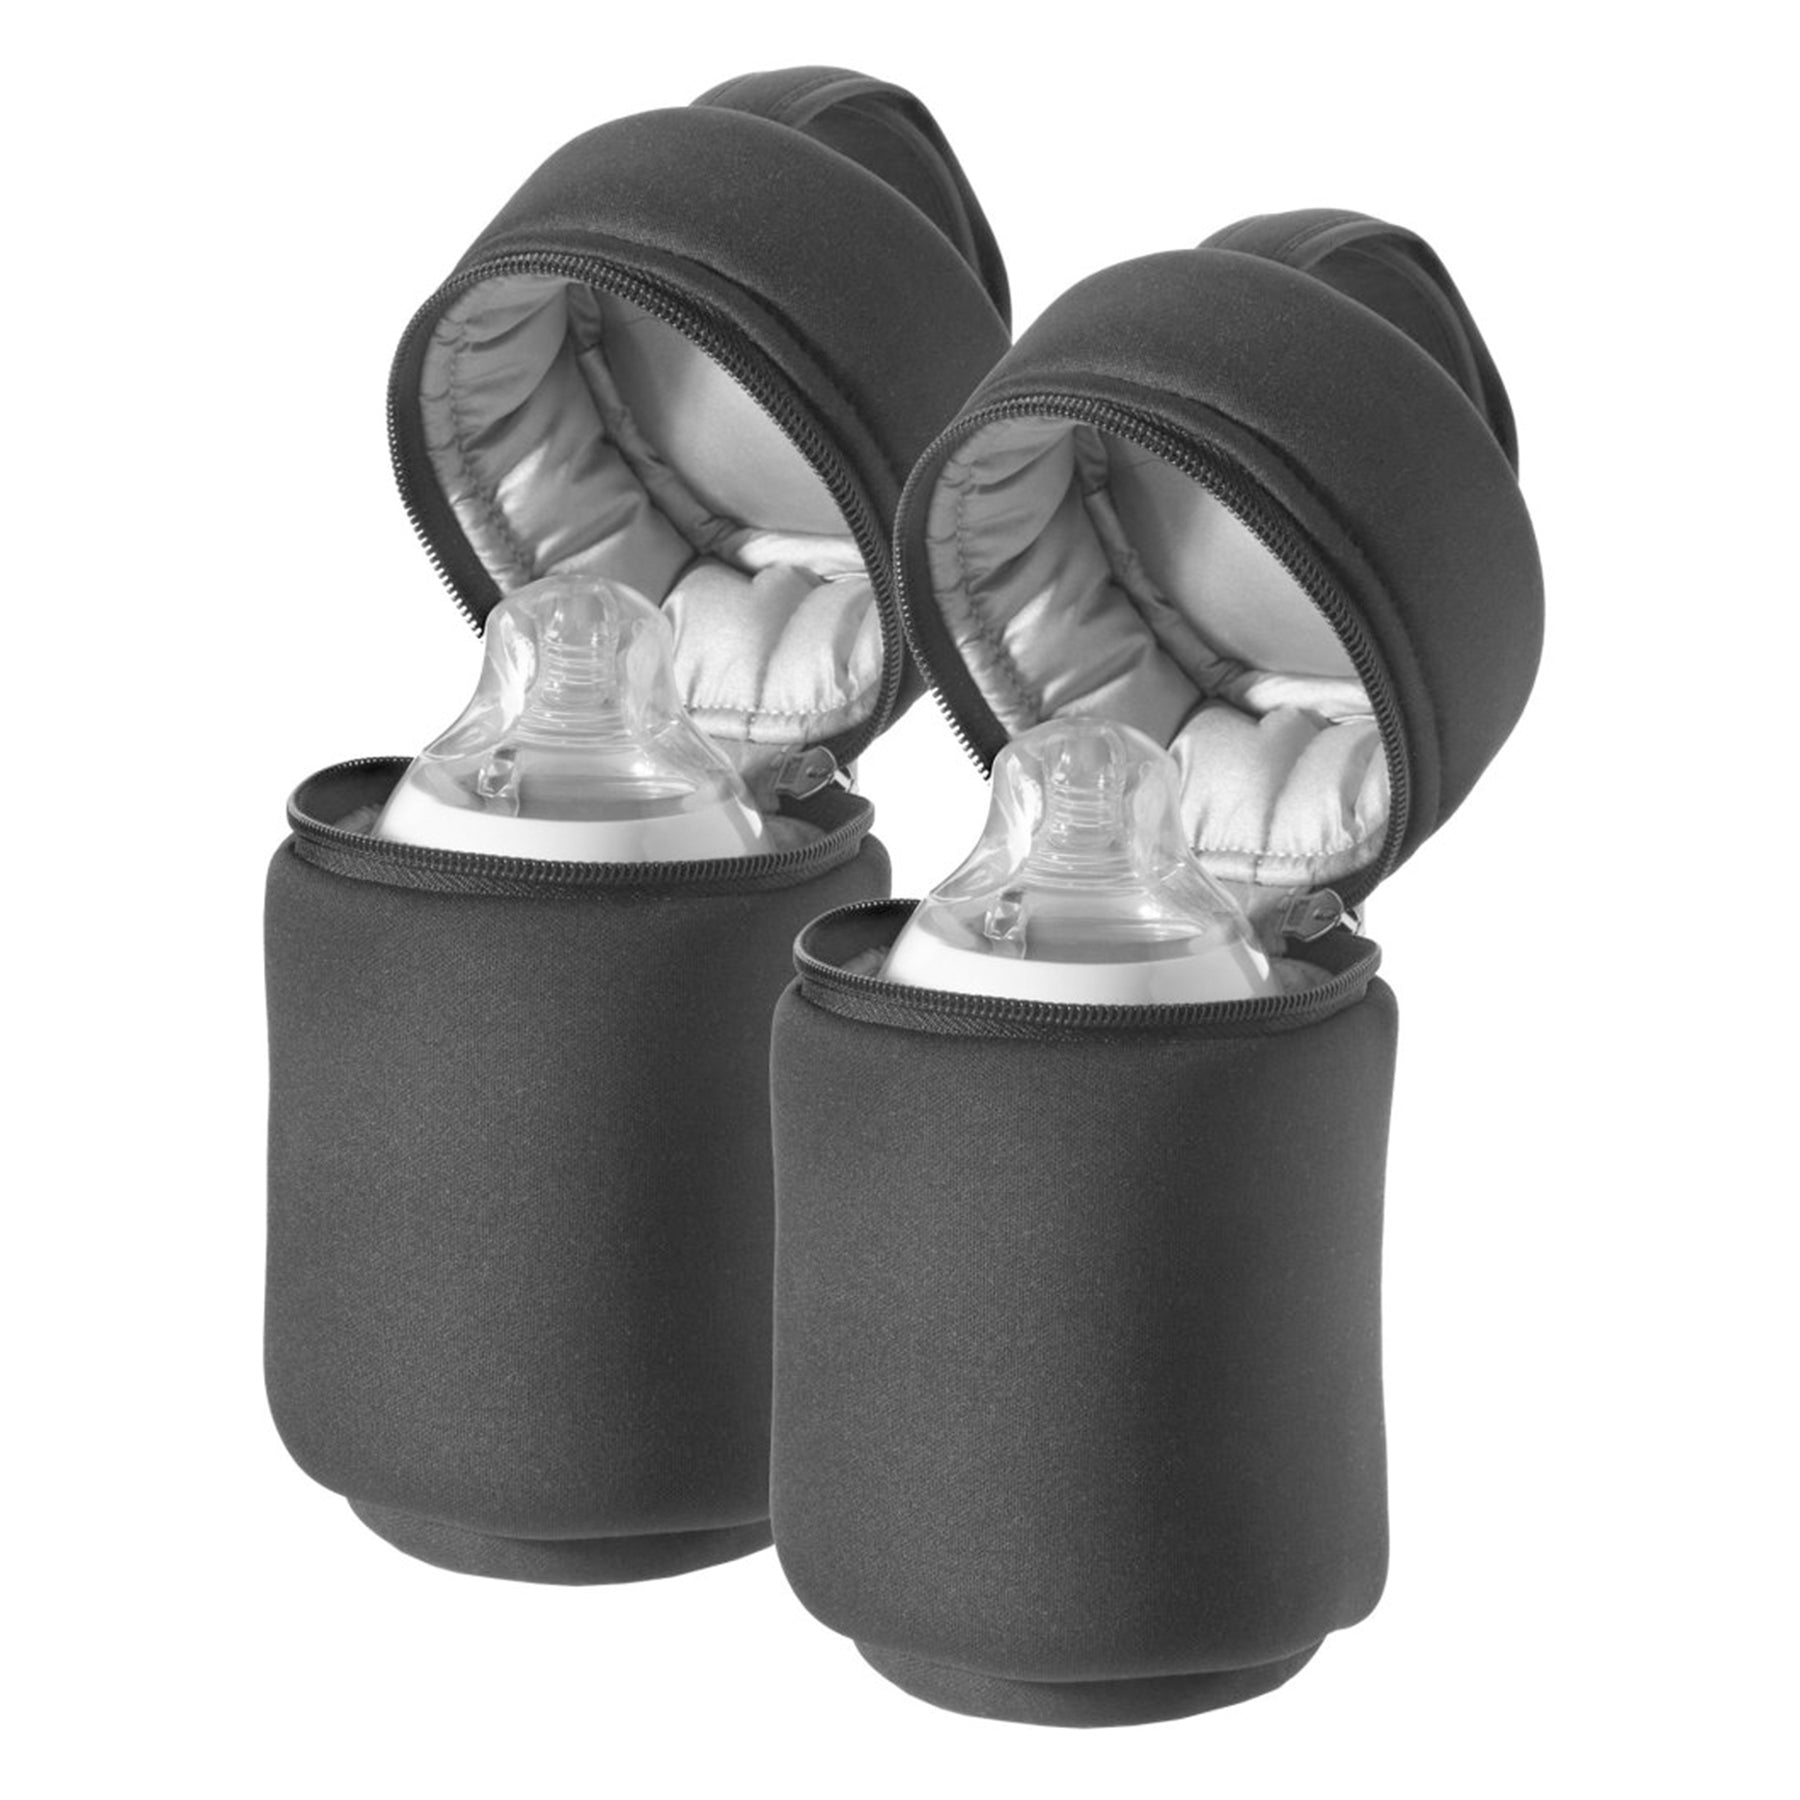 Insulated Bottle Bags - 2 Pack